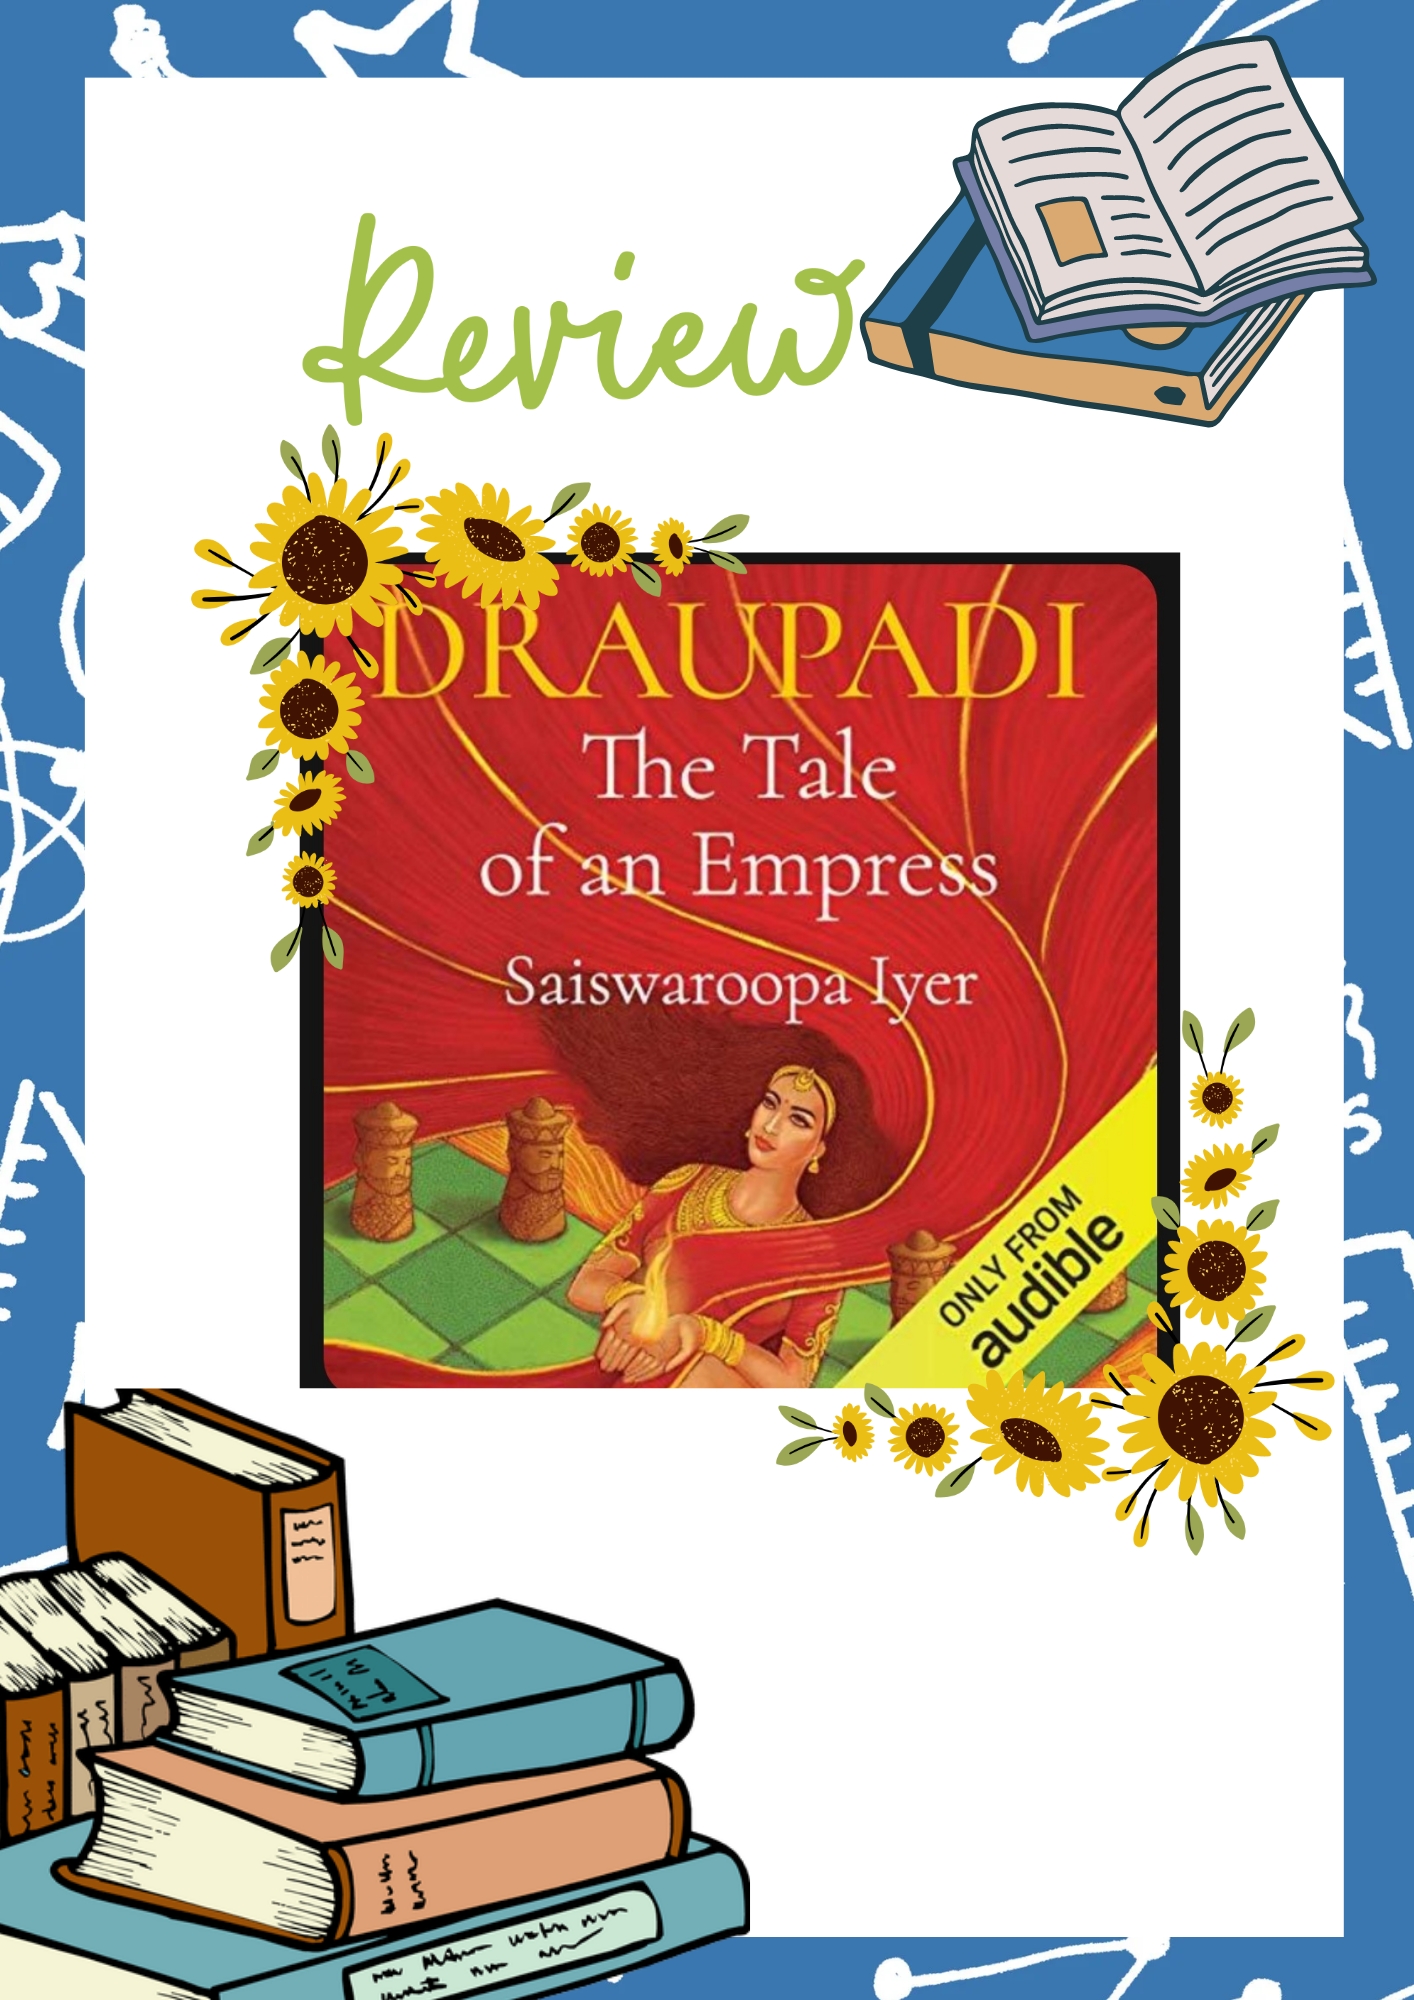 Unveiling the Empress: A Review of “Draupadi: The Tale of an Empress”